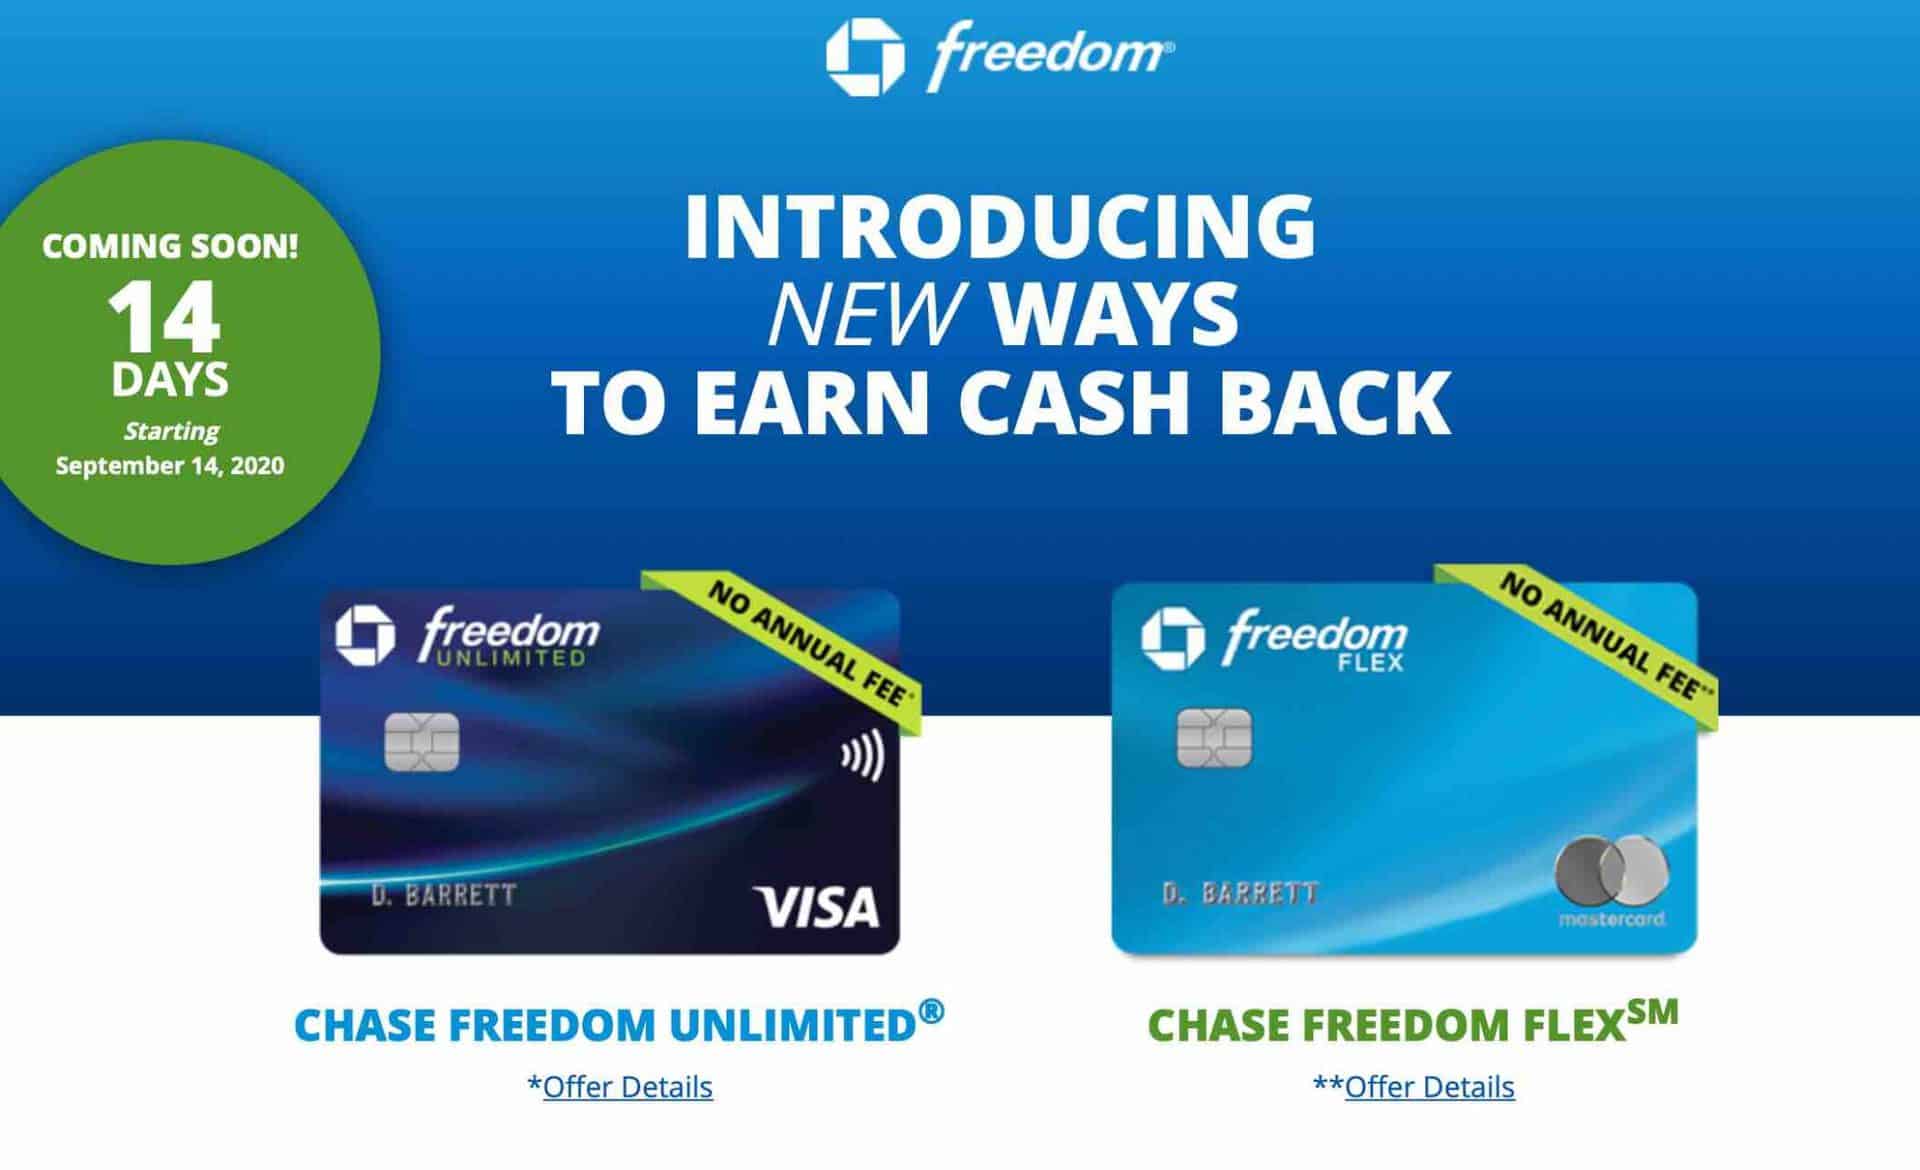 Chase to Launch Freedom Flex; Enhance Freedom Unlimited